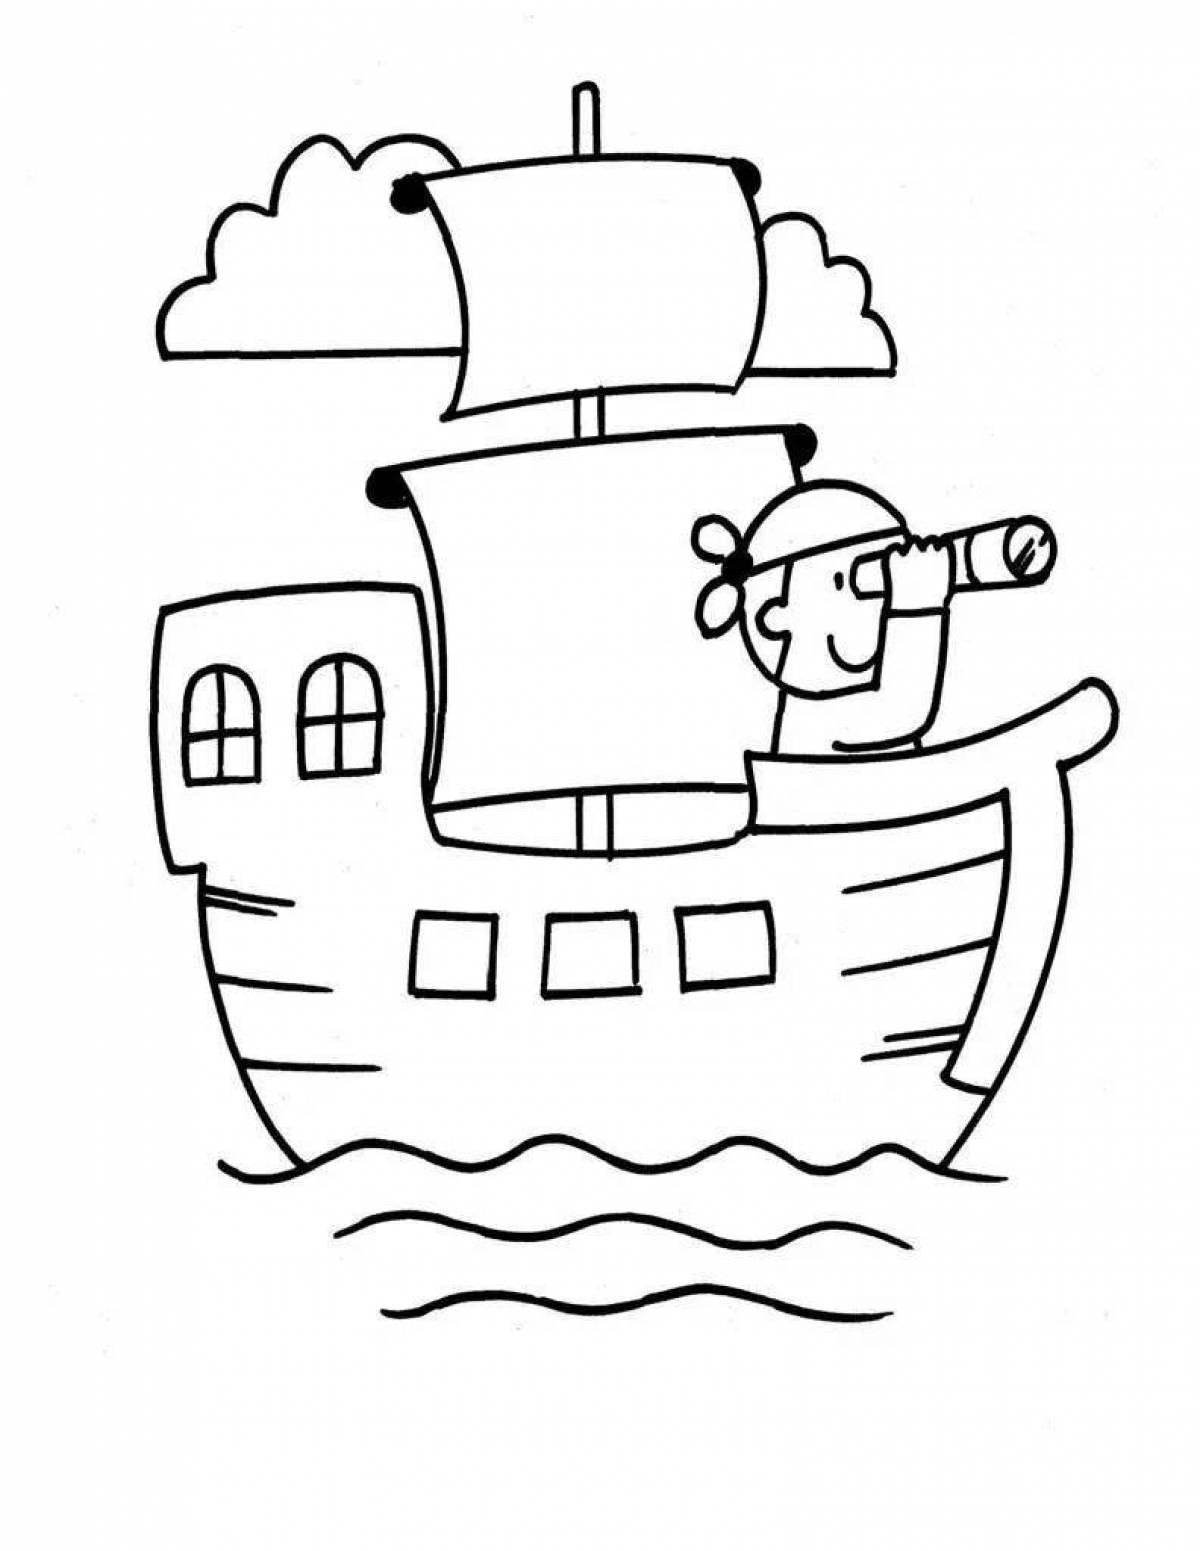 Coloring ship for children 5-6 years old